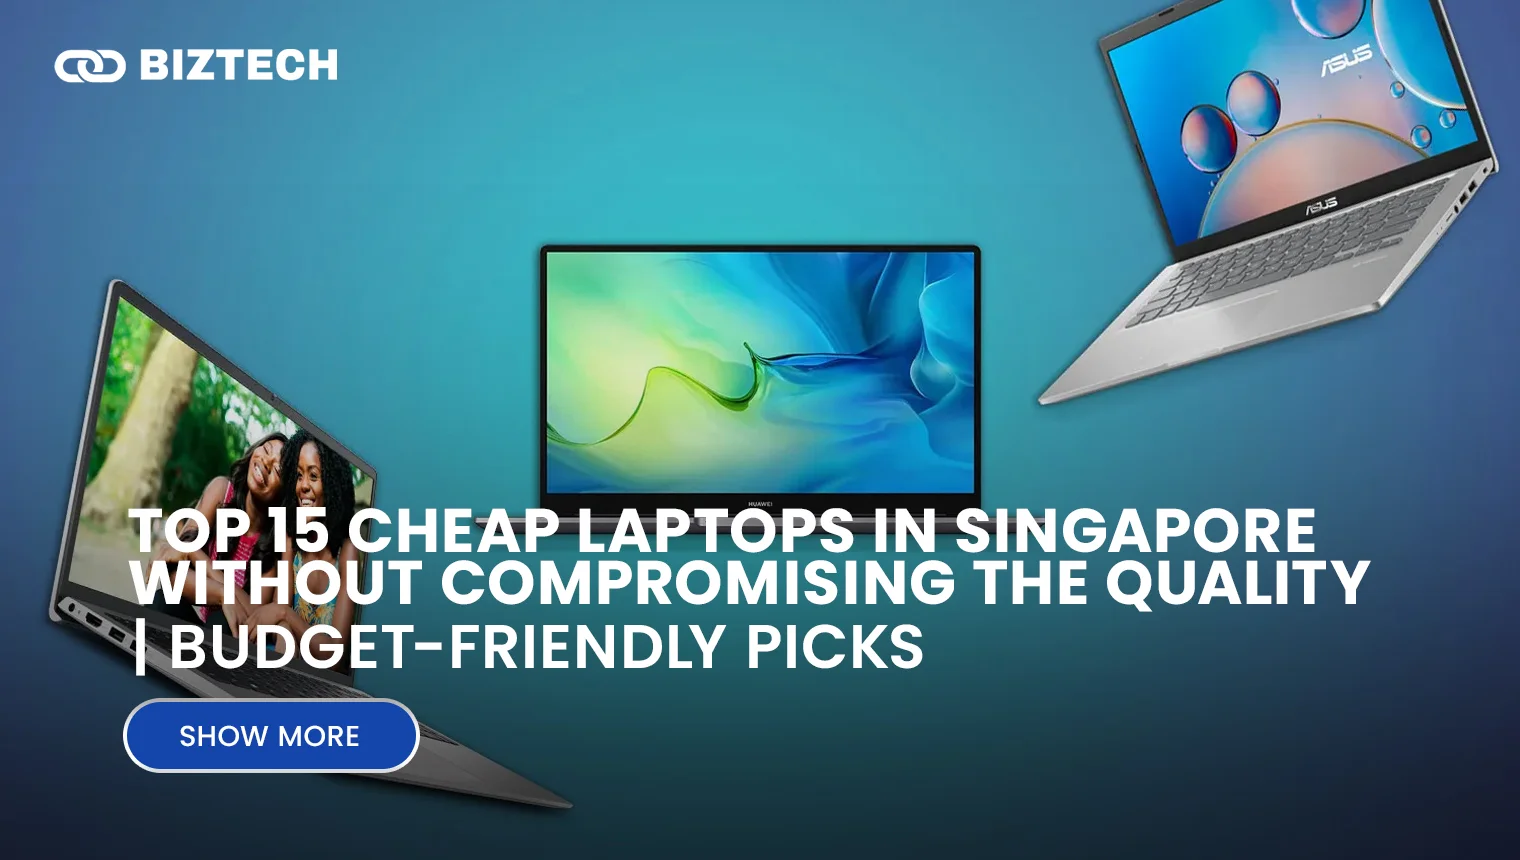 Top 15 Cheap Laptops in Singapore Without Compromising the Quality _ Budget-Friendly Picks